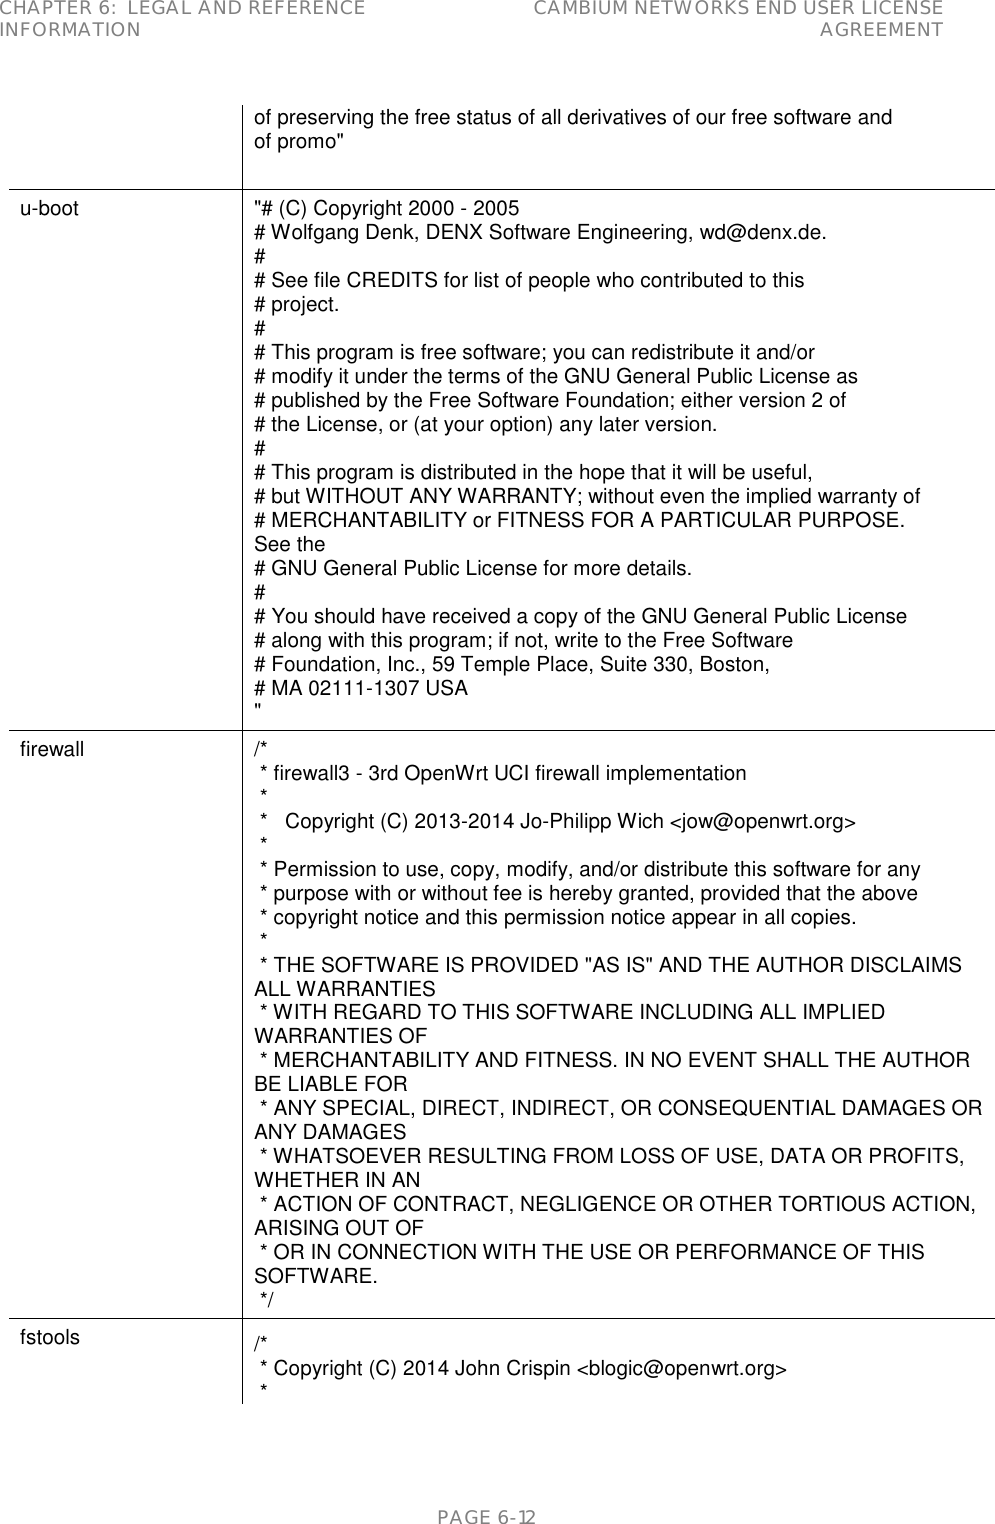 CHAPTER 6:  LEGAL AND REFERENCE INFORMATION CAMBIUM NETWORKS END USER LICENSE AGREEMENT   PAGE 6-12 of preserving the free status of all derivatives of our free software and of promo&quot; u-boot &quot;# (C) Copyright 2000 - 2005 # Wolfgang Denk, DENX Software Engineering, wd@denx.de. # # See file CREDITS for list of people who contributed to this # project. # # This program is free software; you can redistribute it and/or # modify it under the terms of the GNU General Public License as # published by the Free Software Foundation; either version 2 of # the License, or (at your option) any later version. # # This program is distributed in the hope that it will be useful, # but WITHOUT ANY WARRANTY; without even the implied warranty of # MERCHANTABILITY or FITNESS FOR A PARTICULAR PURPOSE.        See the # GNU General Public License for more details. # # You should have received a copy of the GNU General Public License # along with this program; if not, write to the Free Software # Foundation, Inc., 59 Temple Place, Suite 330, Boston, # MA 02111-1307 USA &quot; firewall /*  * firewall3 - 3rd OpenWrt UCI firewall implementation  *  *   Copyright (C) 2013-2014 Jo-Philipp Wich &lt;jow@openwrt.org&gt;  *  * Permission to use, copy, modify, and/or distribute this software for any  * purpose with or without fee is hereby granted, provided that the above  * copyright notice and this permission notice appear in all copies.  *  * THE SOFTWARE IS PROVIDED &quot;AS IS&quot; AND THE AUTHOR DISCLAIMS ALL WARRANTIES  * WITH REGARD TO THIS SOFTWARE INCLUDING ALL IMPLIED WARRANTIES OF  * MERCHANTABILITY AND FITNESS. IN NO EVENT SHALL THE AUTHOR BE LIABLE FOR  * ANY SPECIAL, DIRECT, INDIRECT, OR CONSEQUENTIAL DAMAGES OR ANY DAMAGES  * WHATSOEVER RESULTING FROM LOSS OF USE, DATA OR PROFITS, WHETHER IN AN  * ACTION OF CONTRACT, NEGLIGENCE OR OTHER TORTIOUS ACTION, ARISING OUT OF  * OR IN CONNECTION WITH THE USE OR PERFORMANCE OF THIS SOFTWARE.  */ fstools /*  * Copyright (C) 2014 John Crispin &lt;blogic@openwrt.org&gt;  * 